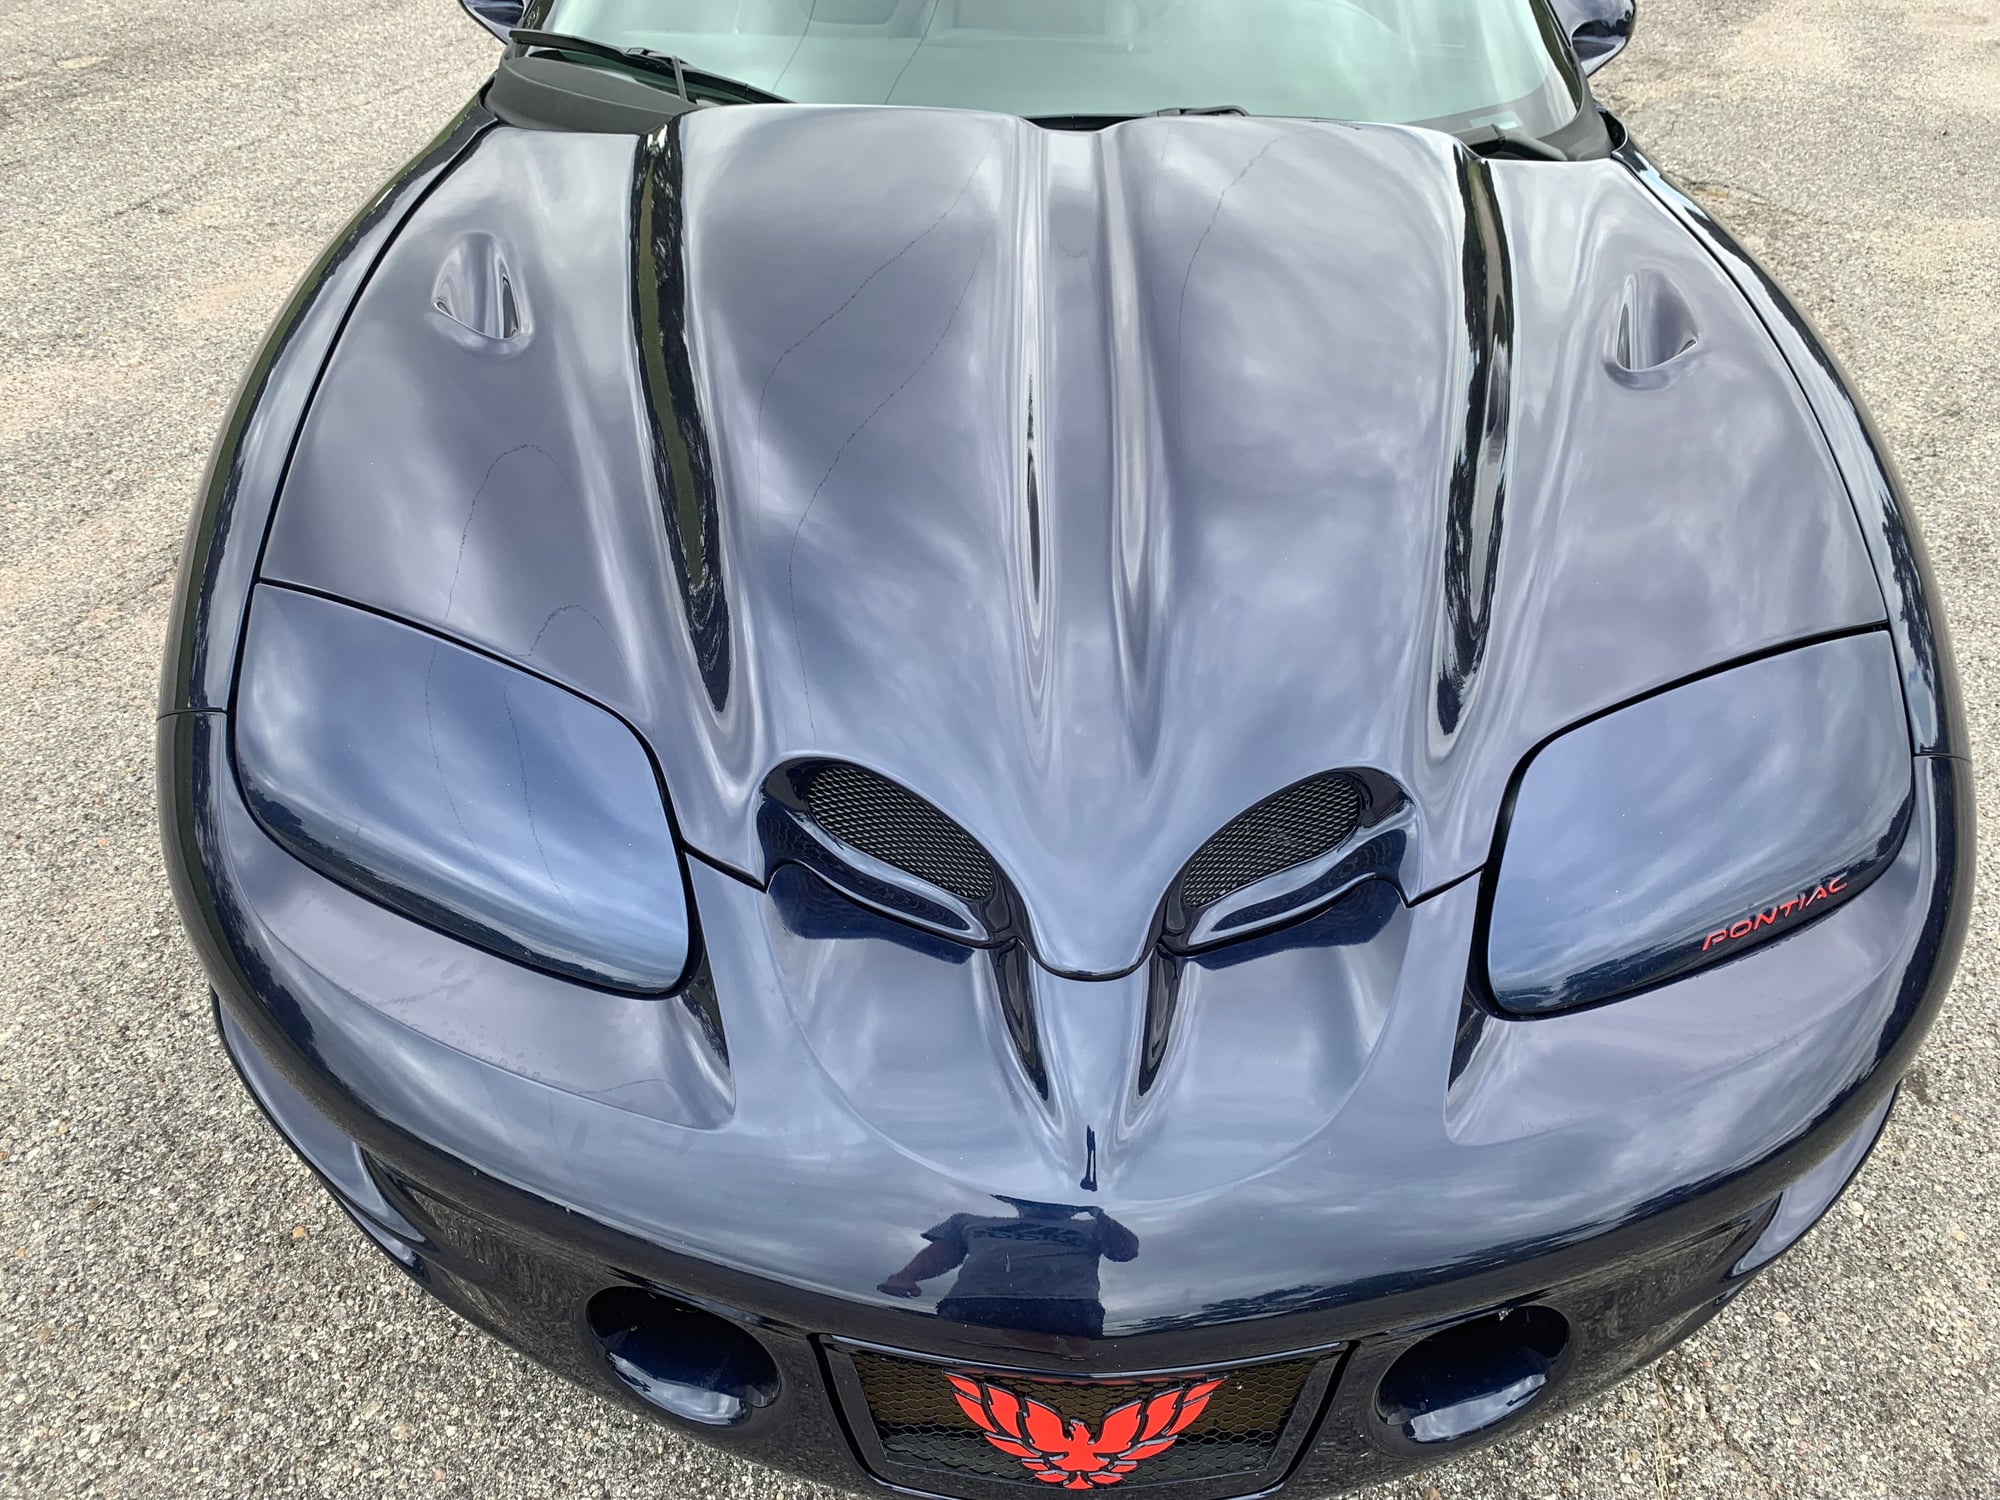 2002 Pontiac Firebird - 2002 Pontiac trans am ws6 HCI supercharged procharger low miles, forged, prc heads, - Used - VIN 2g2fv22g722158021 - 75,000 Miles - 8 cyl - 2WD - Automatic - Coupe - Blue - Hutchinson, KS 67502, United States